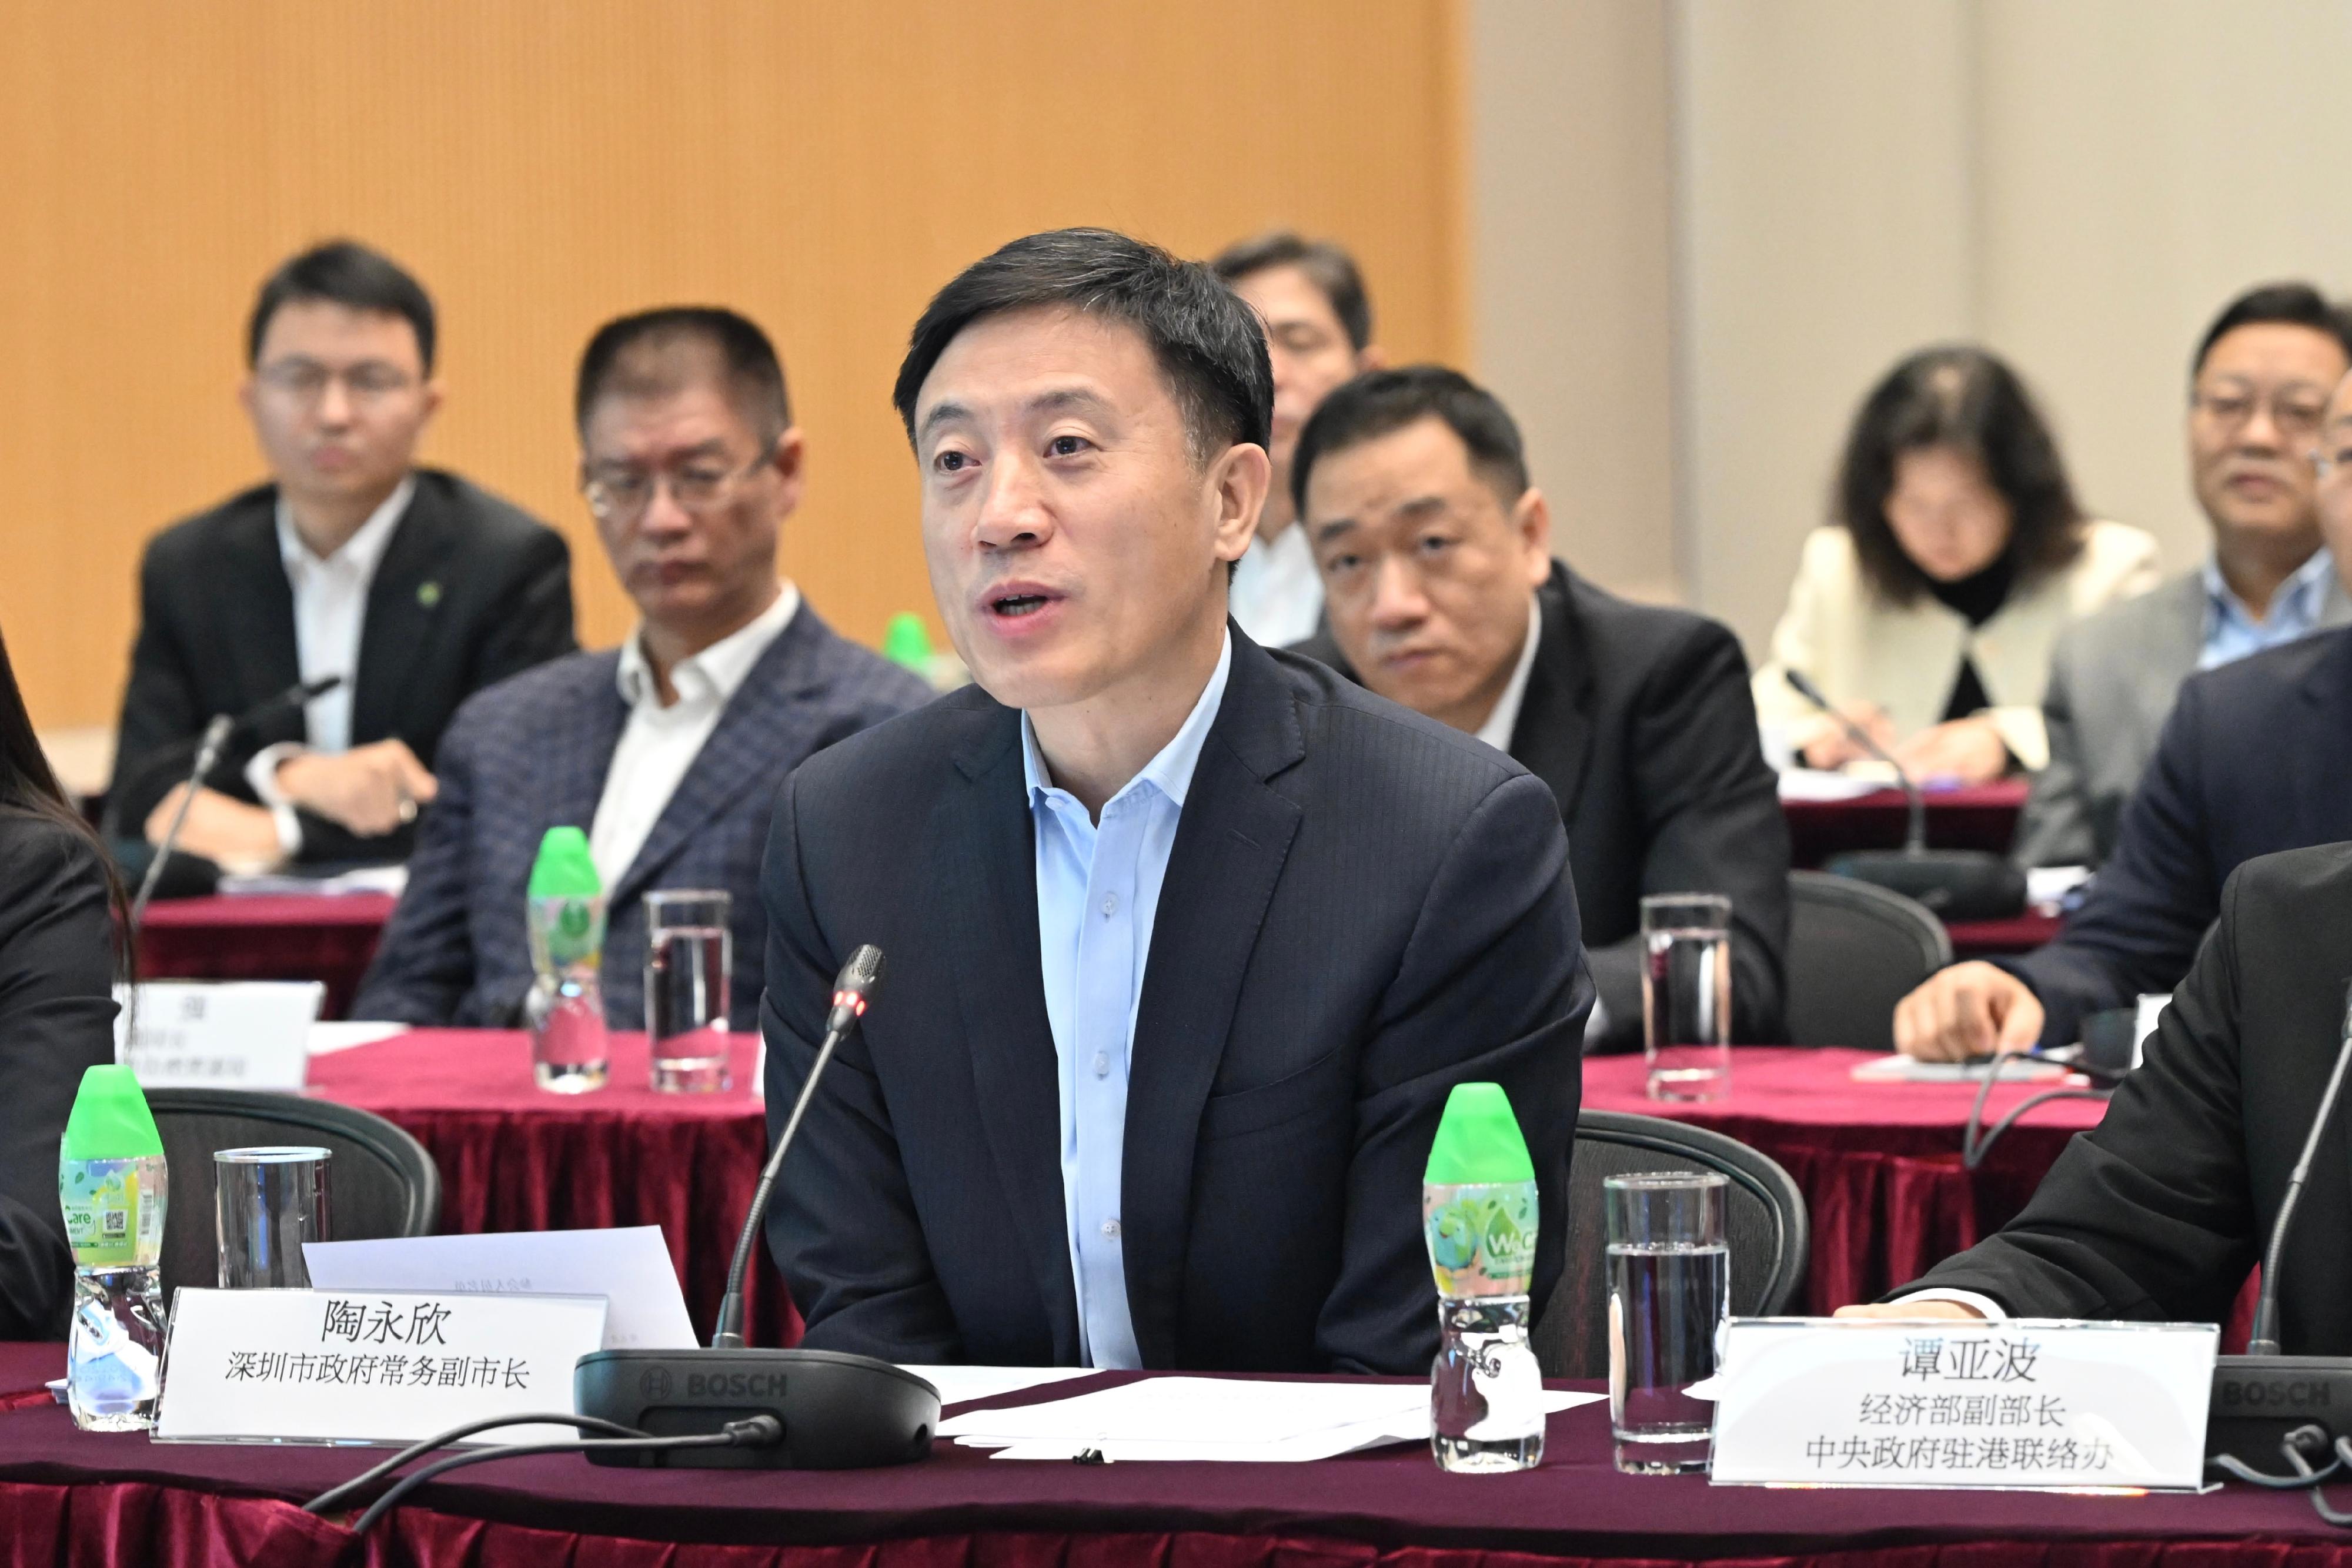 The Deputy Financial Secretary, Mr Michael Wong, and Vice Mayor of the Shenzhen Municipal People's Government Mr Tao Yongxin (first row, centre), leading delegations of the governments of the Hong Kong Special Administrative Region and Shenzhen respectively, held the fourth meeting of the Task Force for Collaboration on the Northern Metropolis Development Strategy in Hong Kong today (February 7).